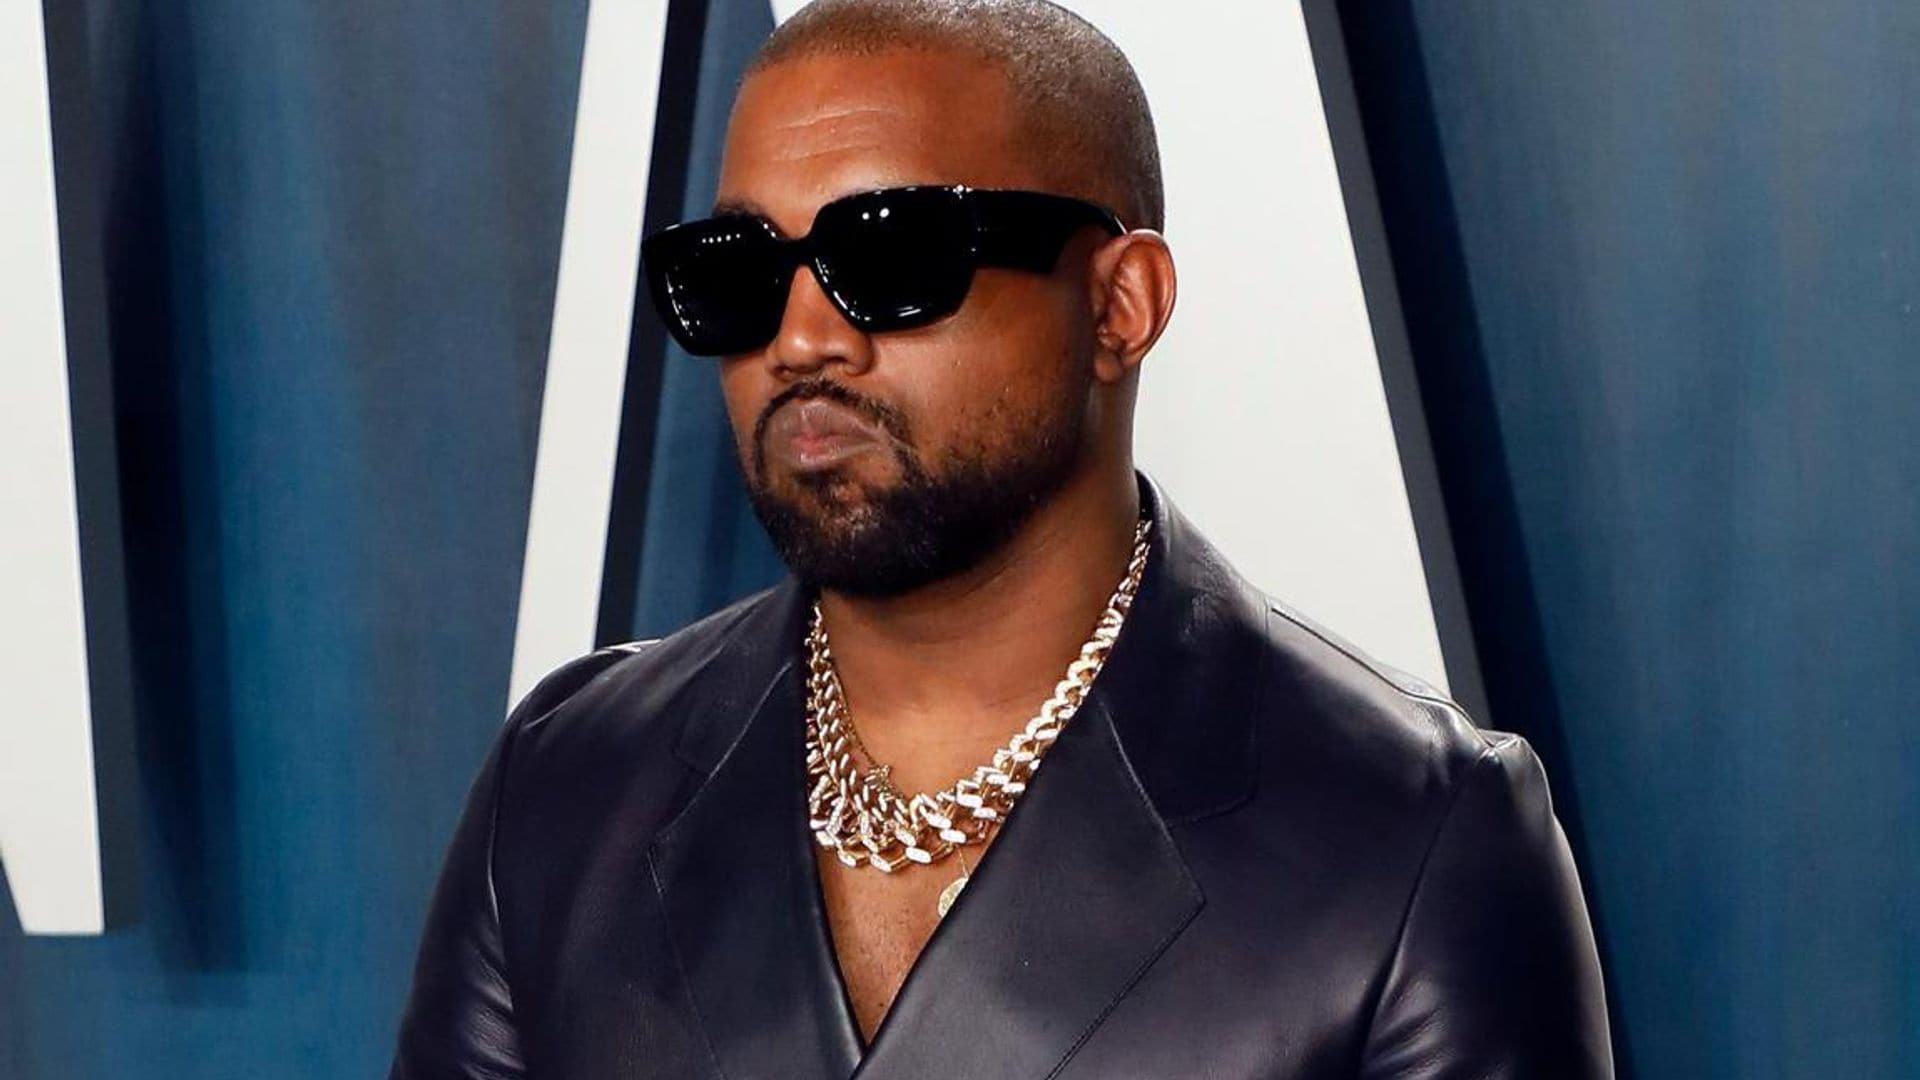 Kanye West issues ultimatums to Adidas and Gap while demanding board seats